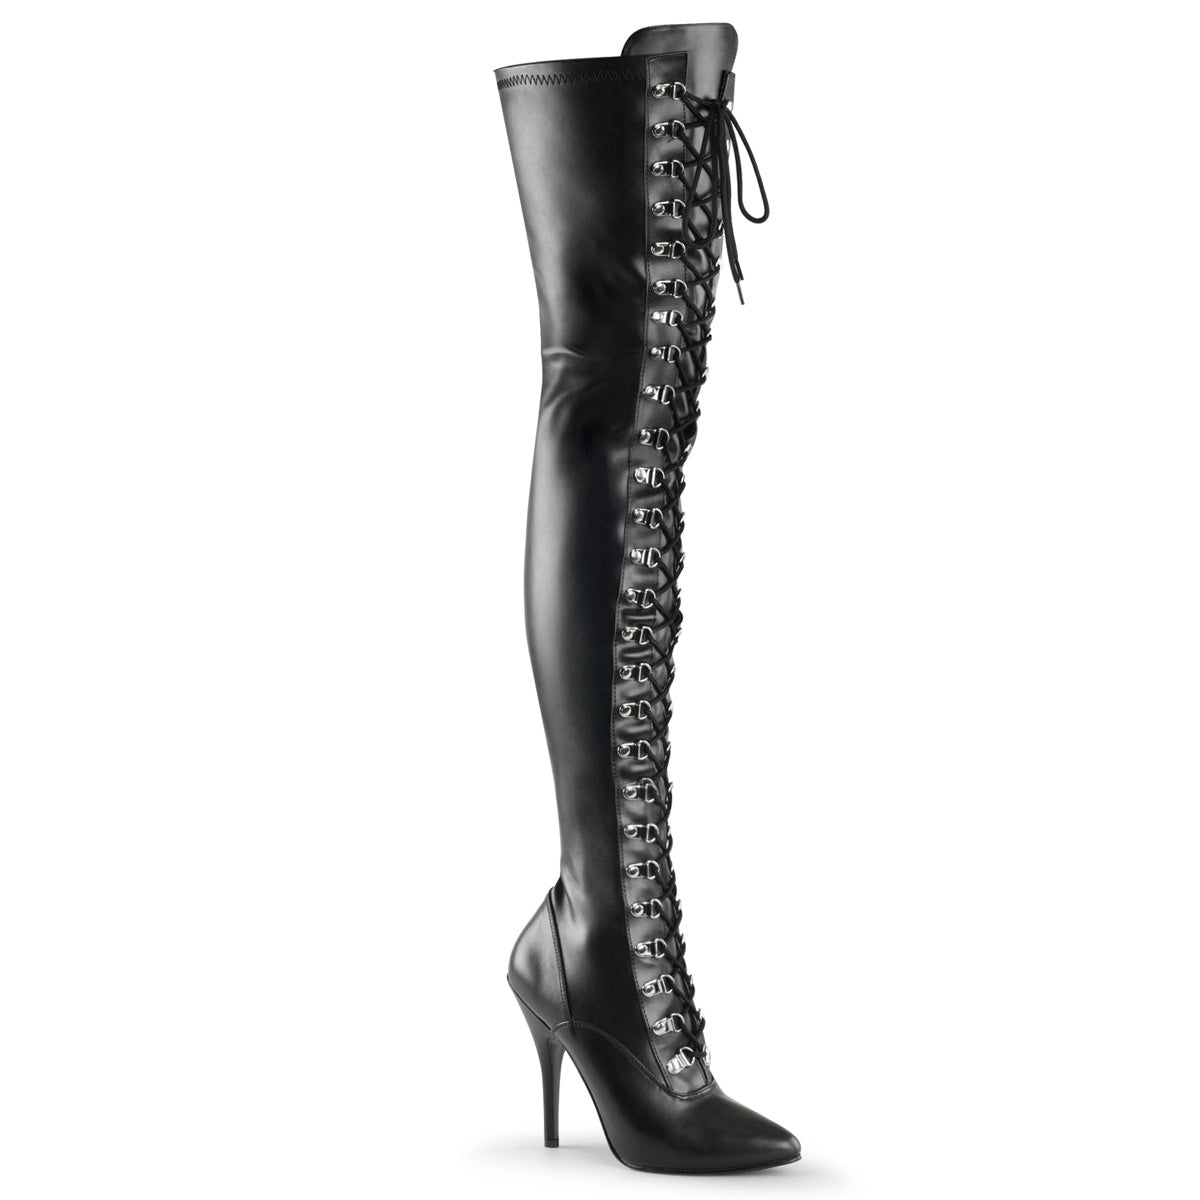 SEDUCE-3024 Pleasers Thigh Boots 5" Heel Black Fetish Shoes